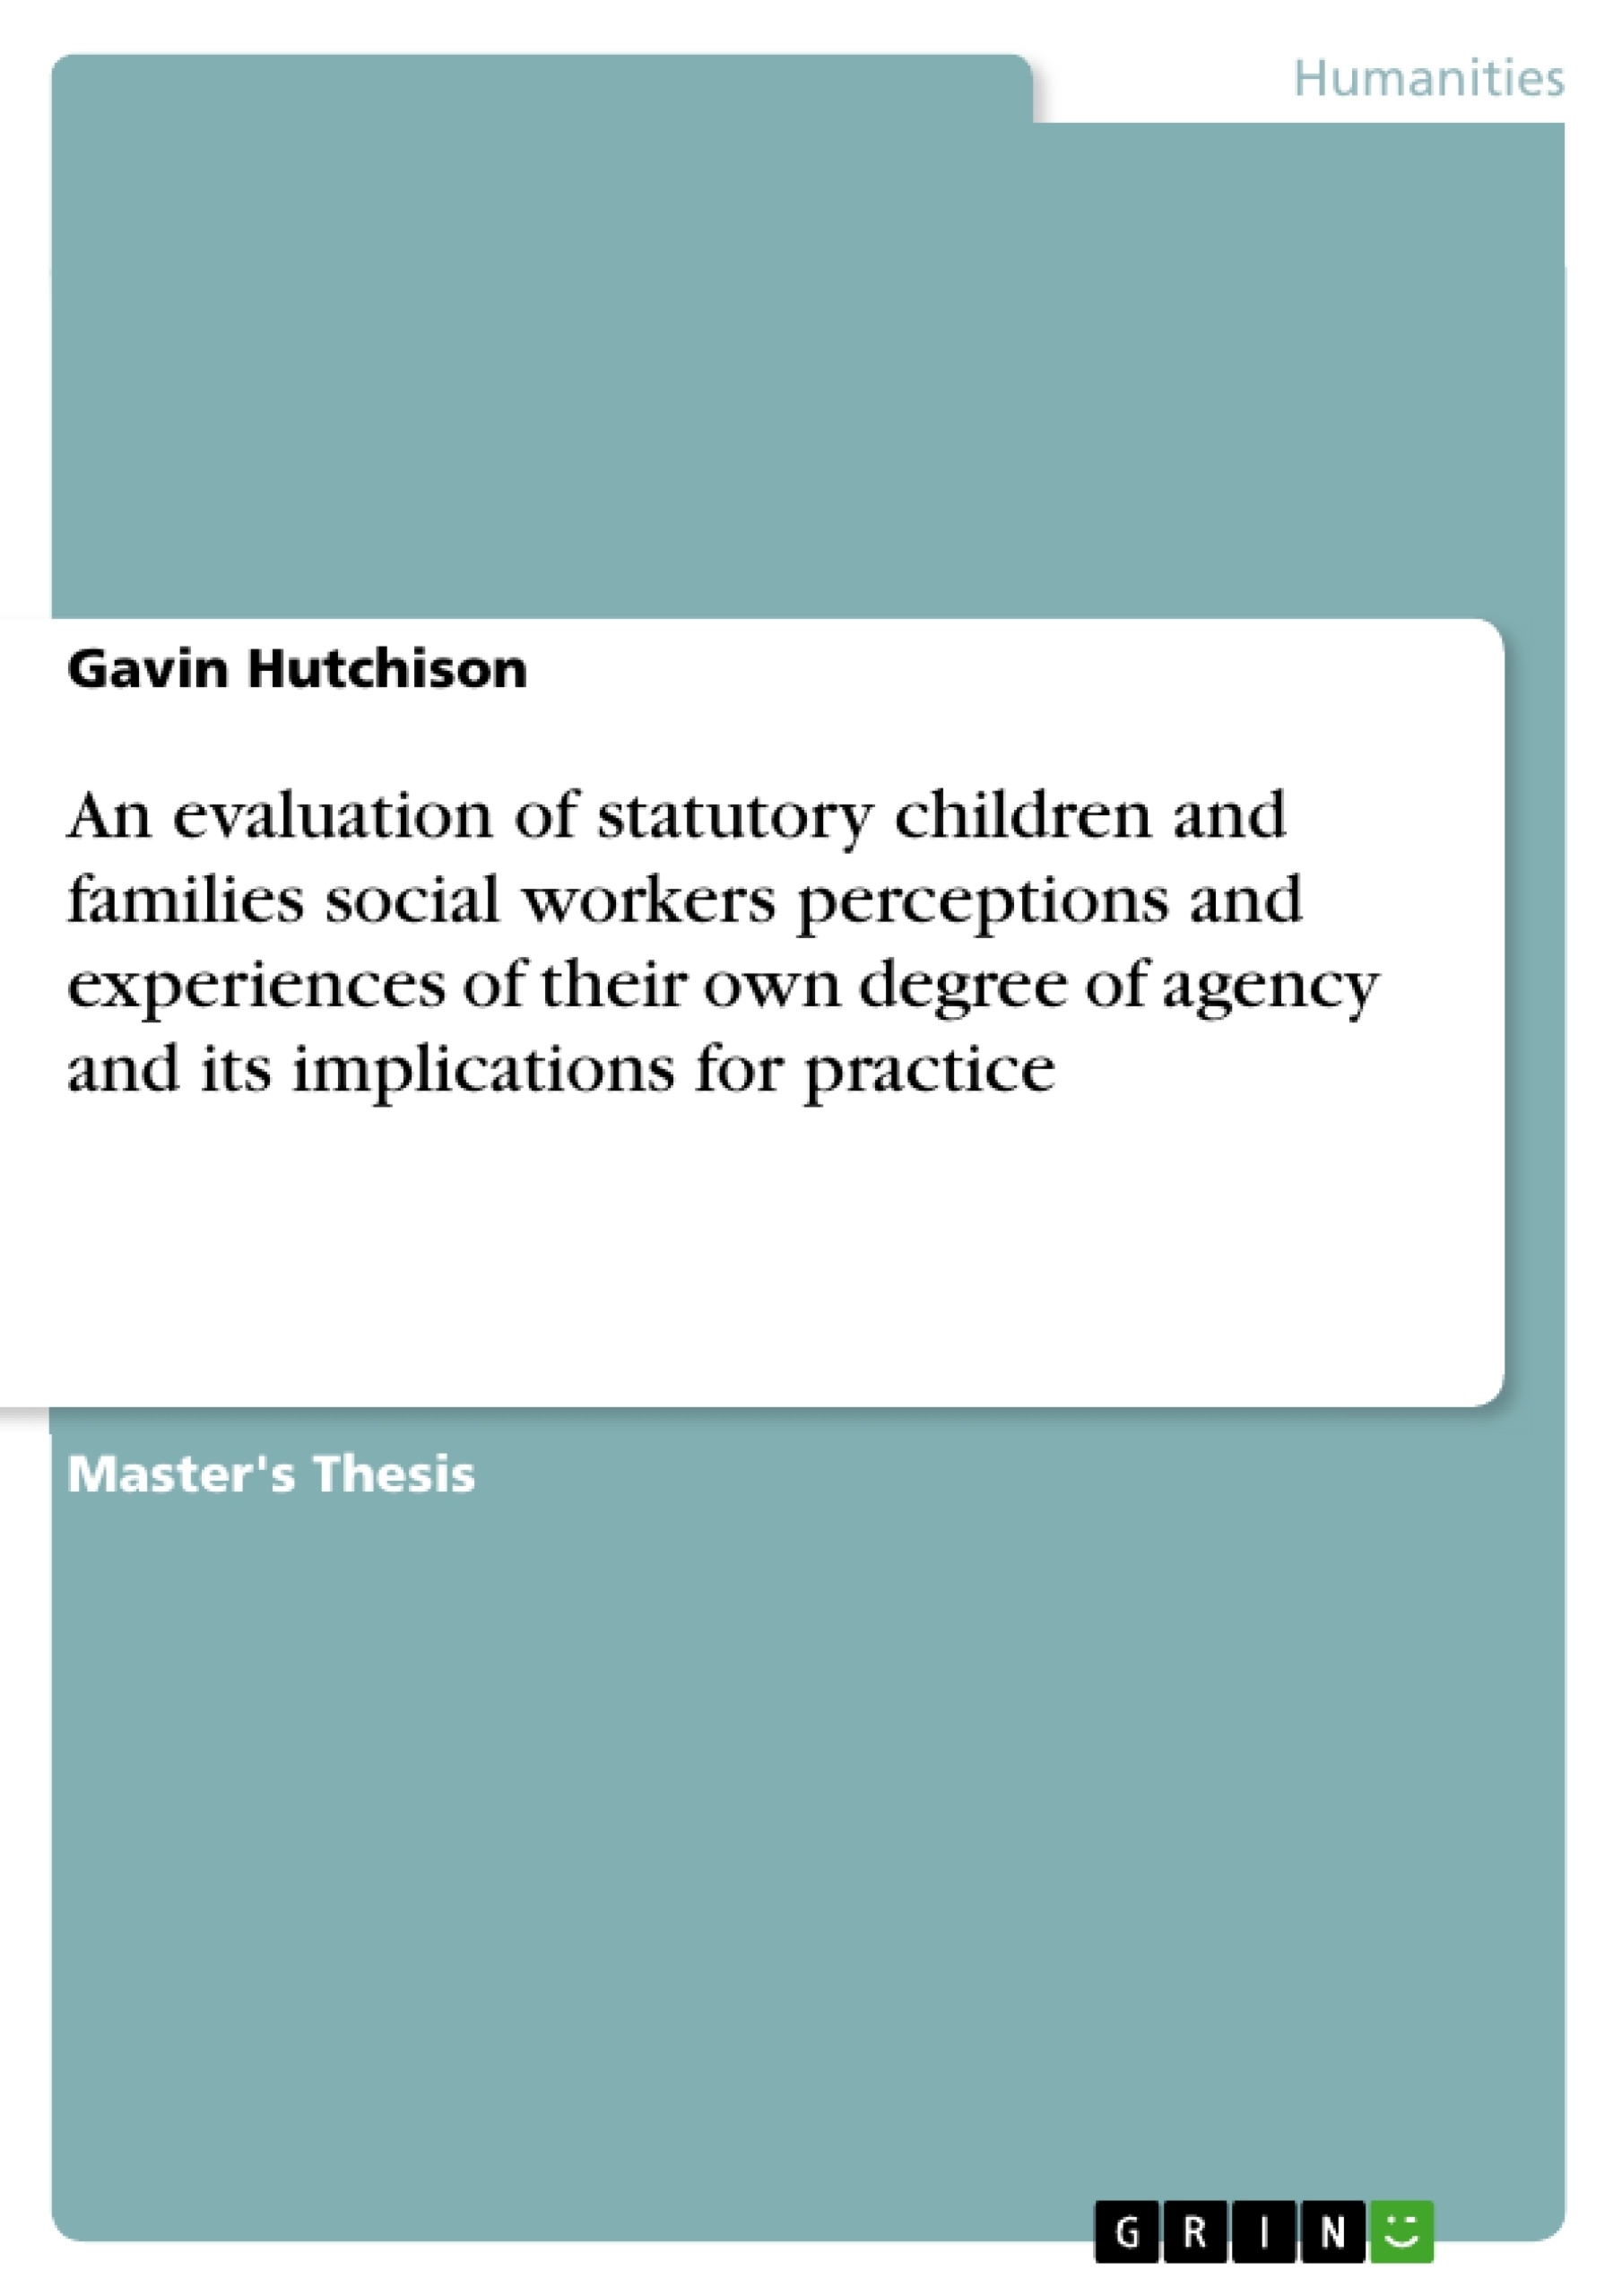 Título: An evaluation of statutory children and families social workers perceptions and experiences of their own degree of agency and its implications for practice